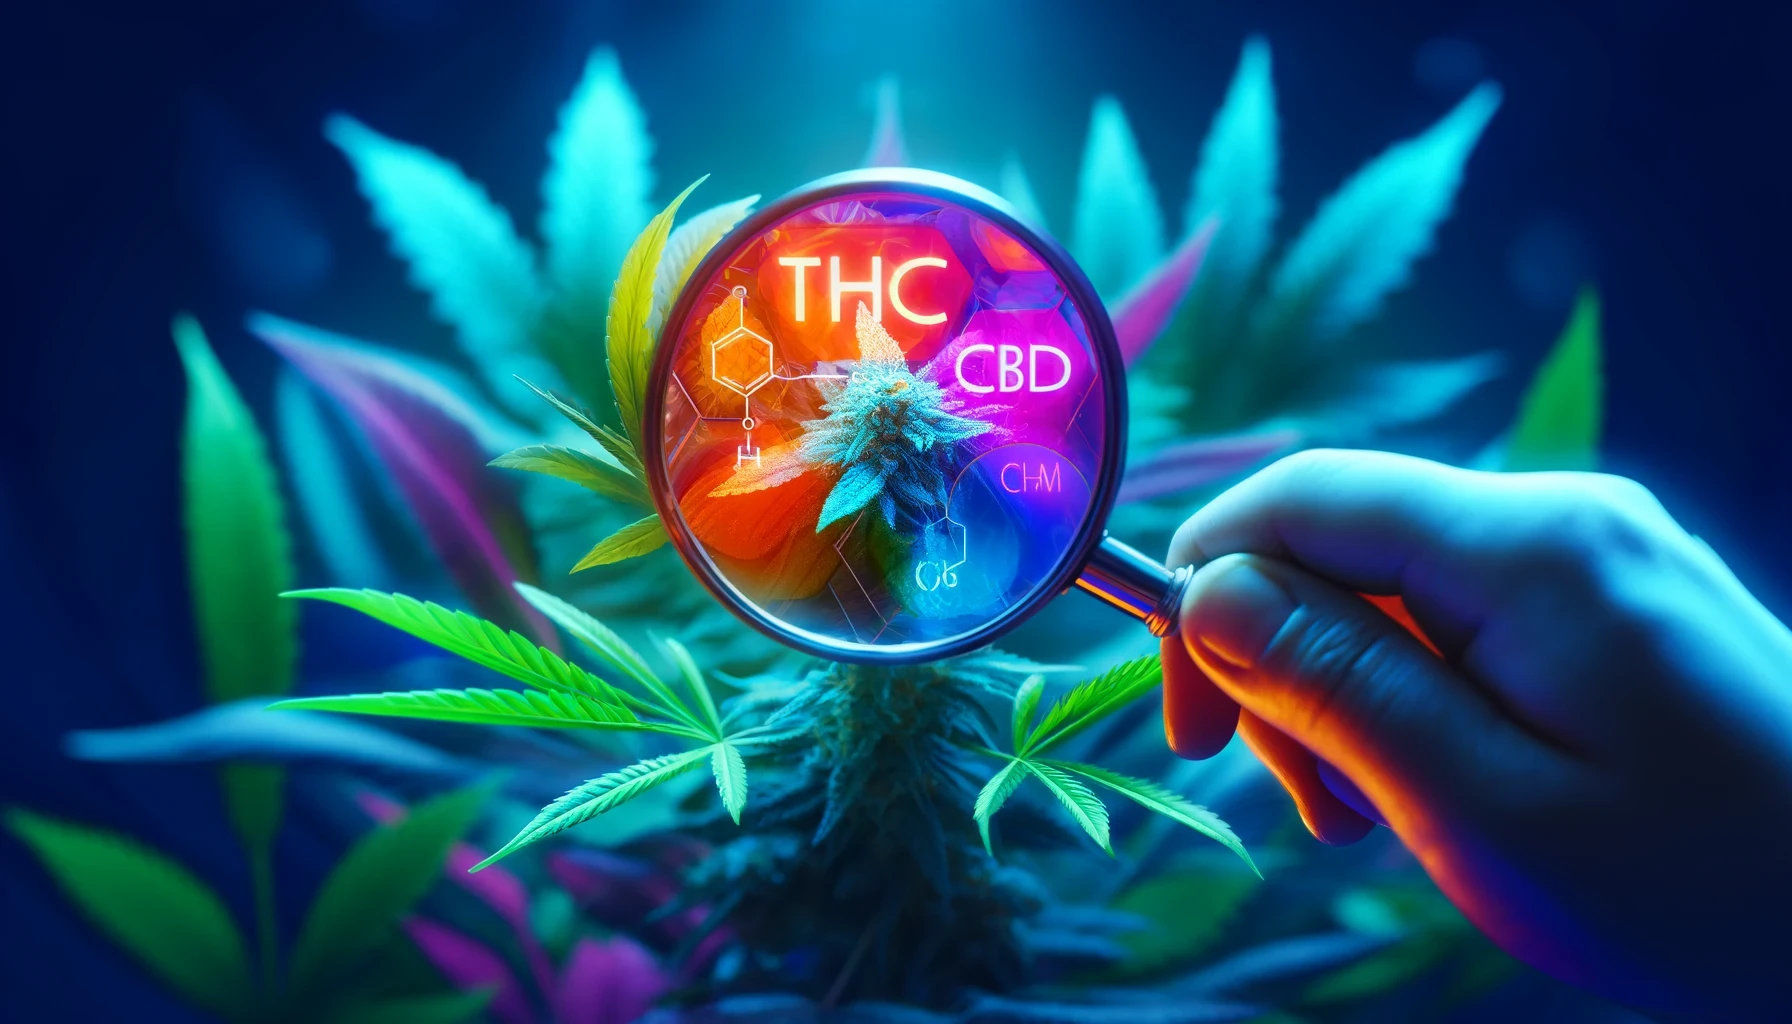 A magnifying glass highlighting the THC and CBD molecules on a cannabis leaf